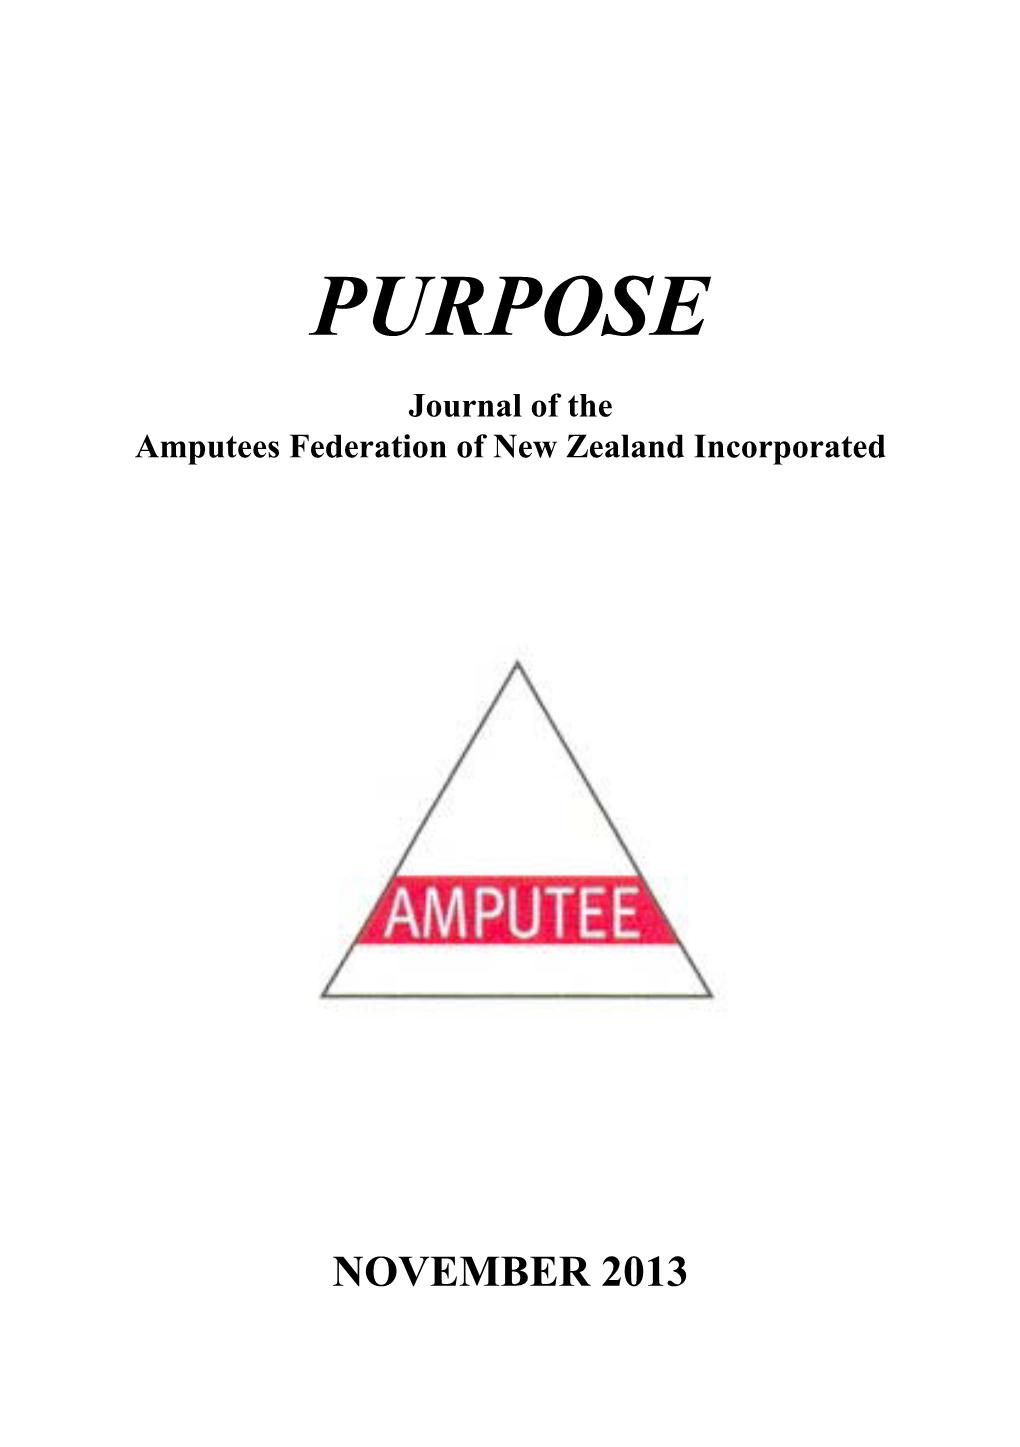 PURPOSE Journal of the Amputees Federation of New Zealand Incorporated